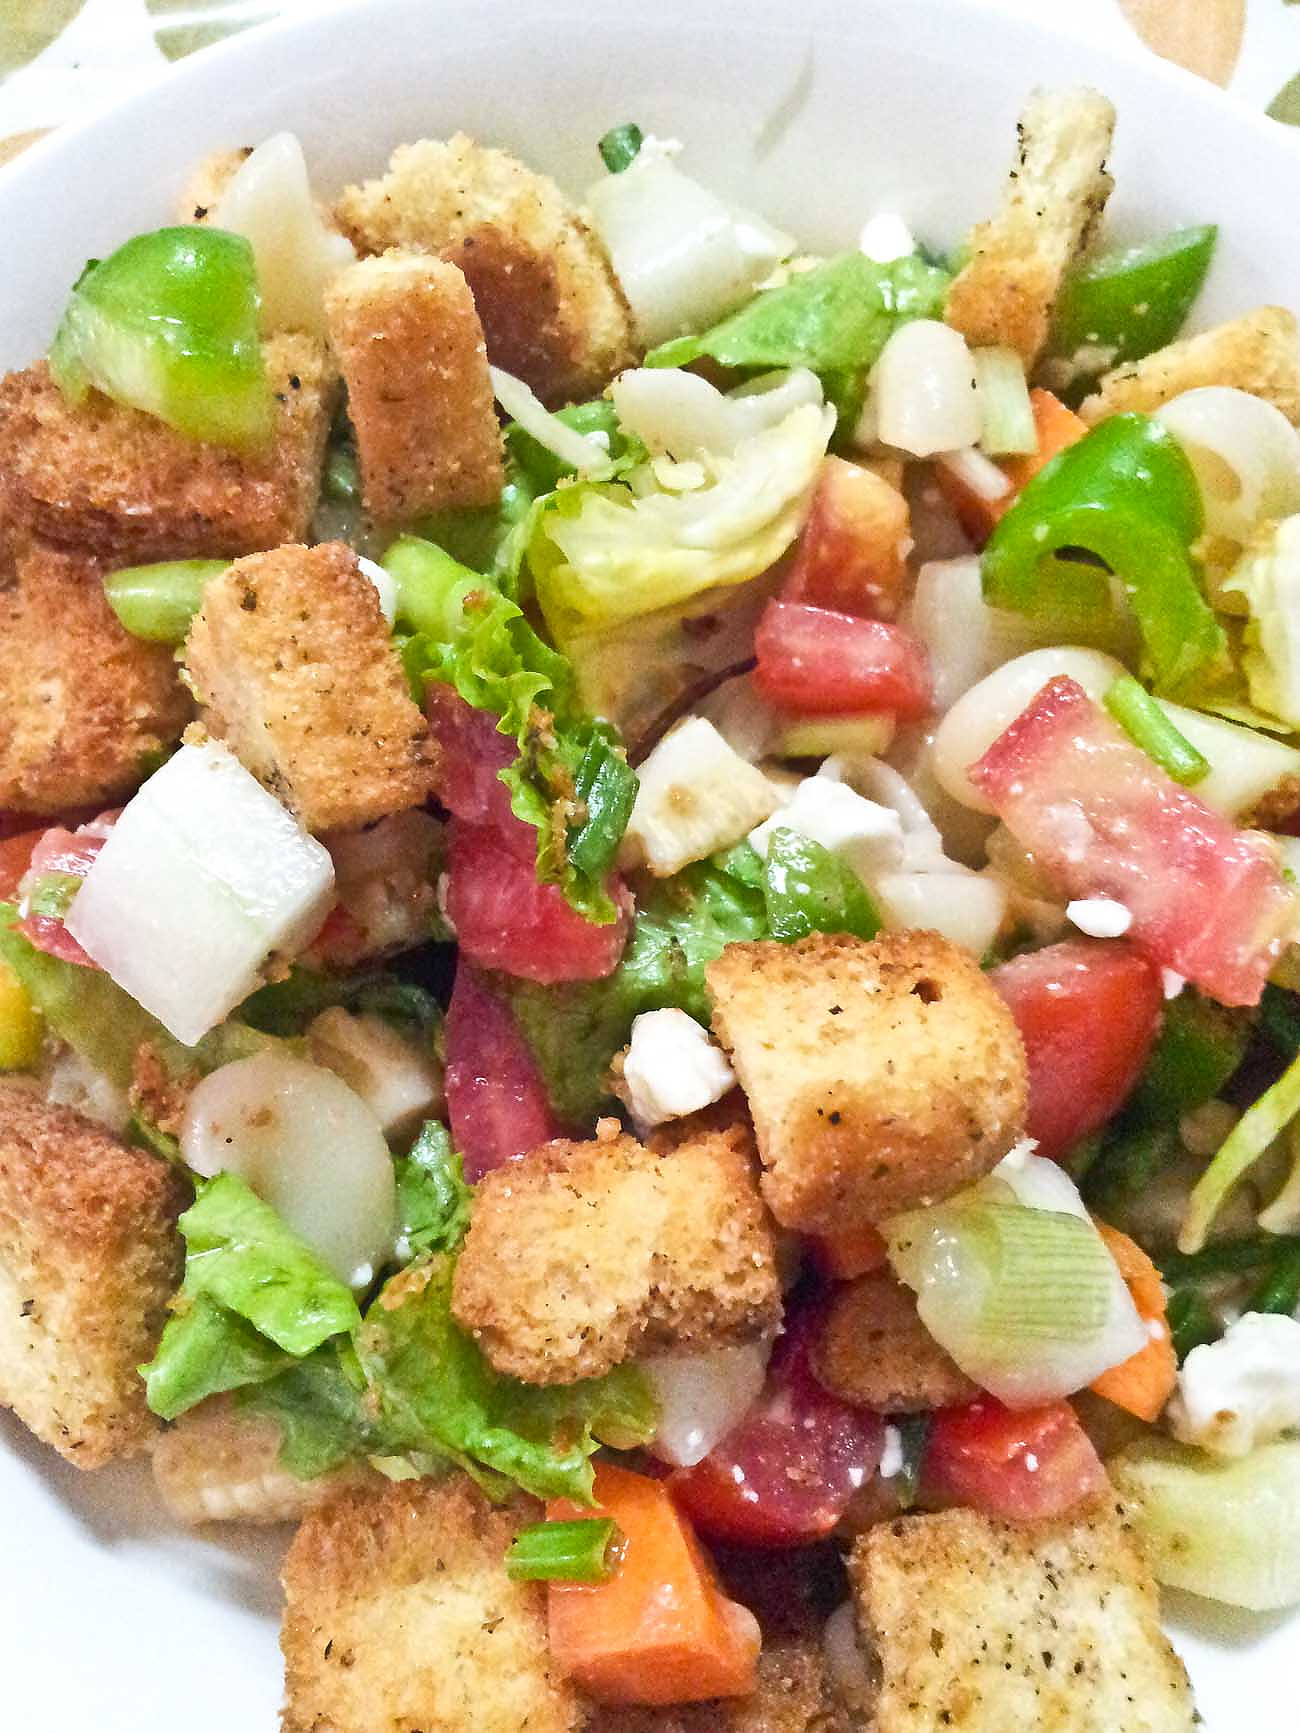 Pasta Salad Recipe with Summer Vegetable Lettuce & Croutons